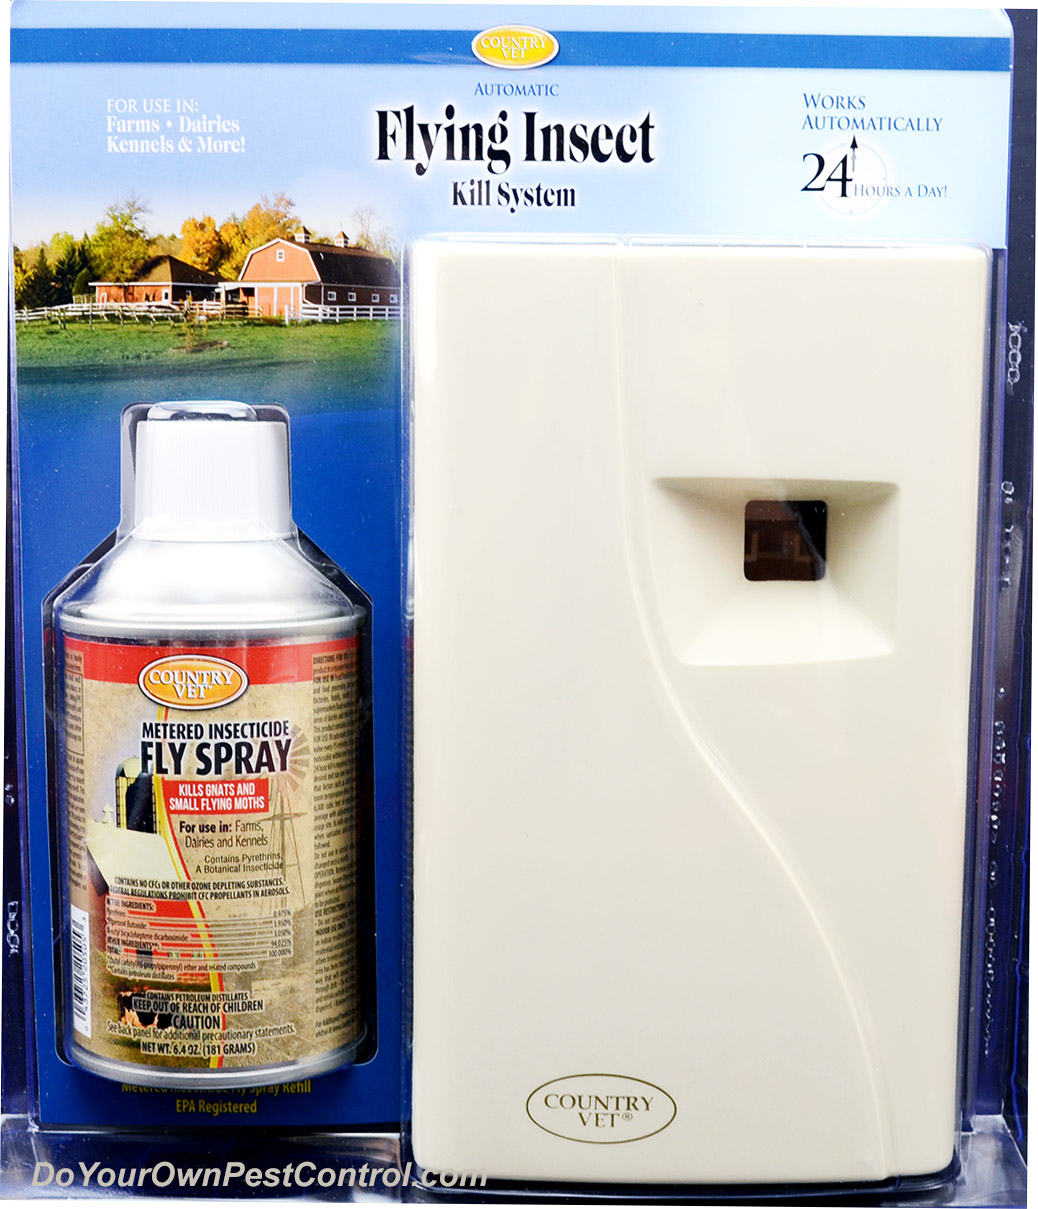 Country Vet 30 Day Flying Insect Control Kit (Discontinued)